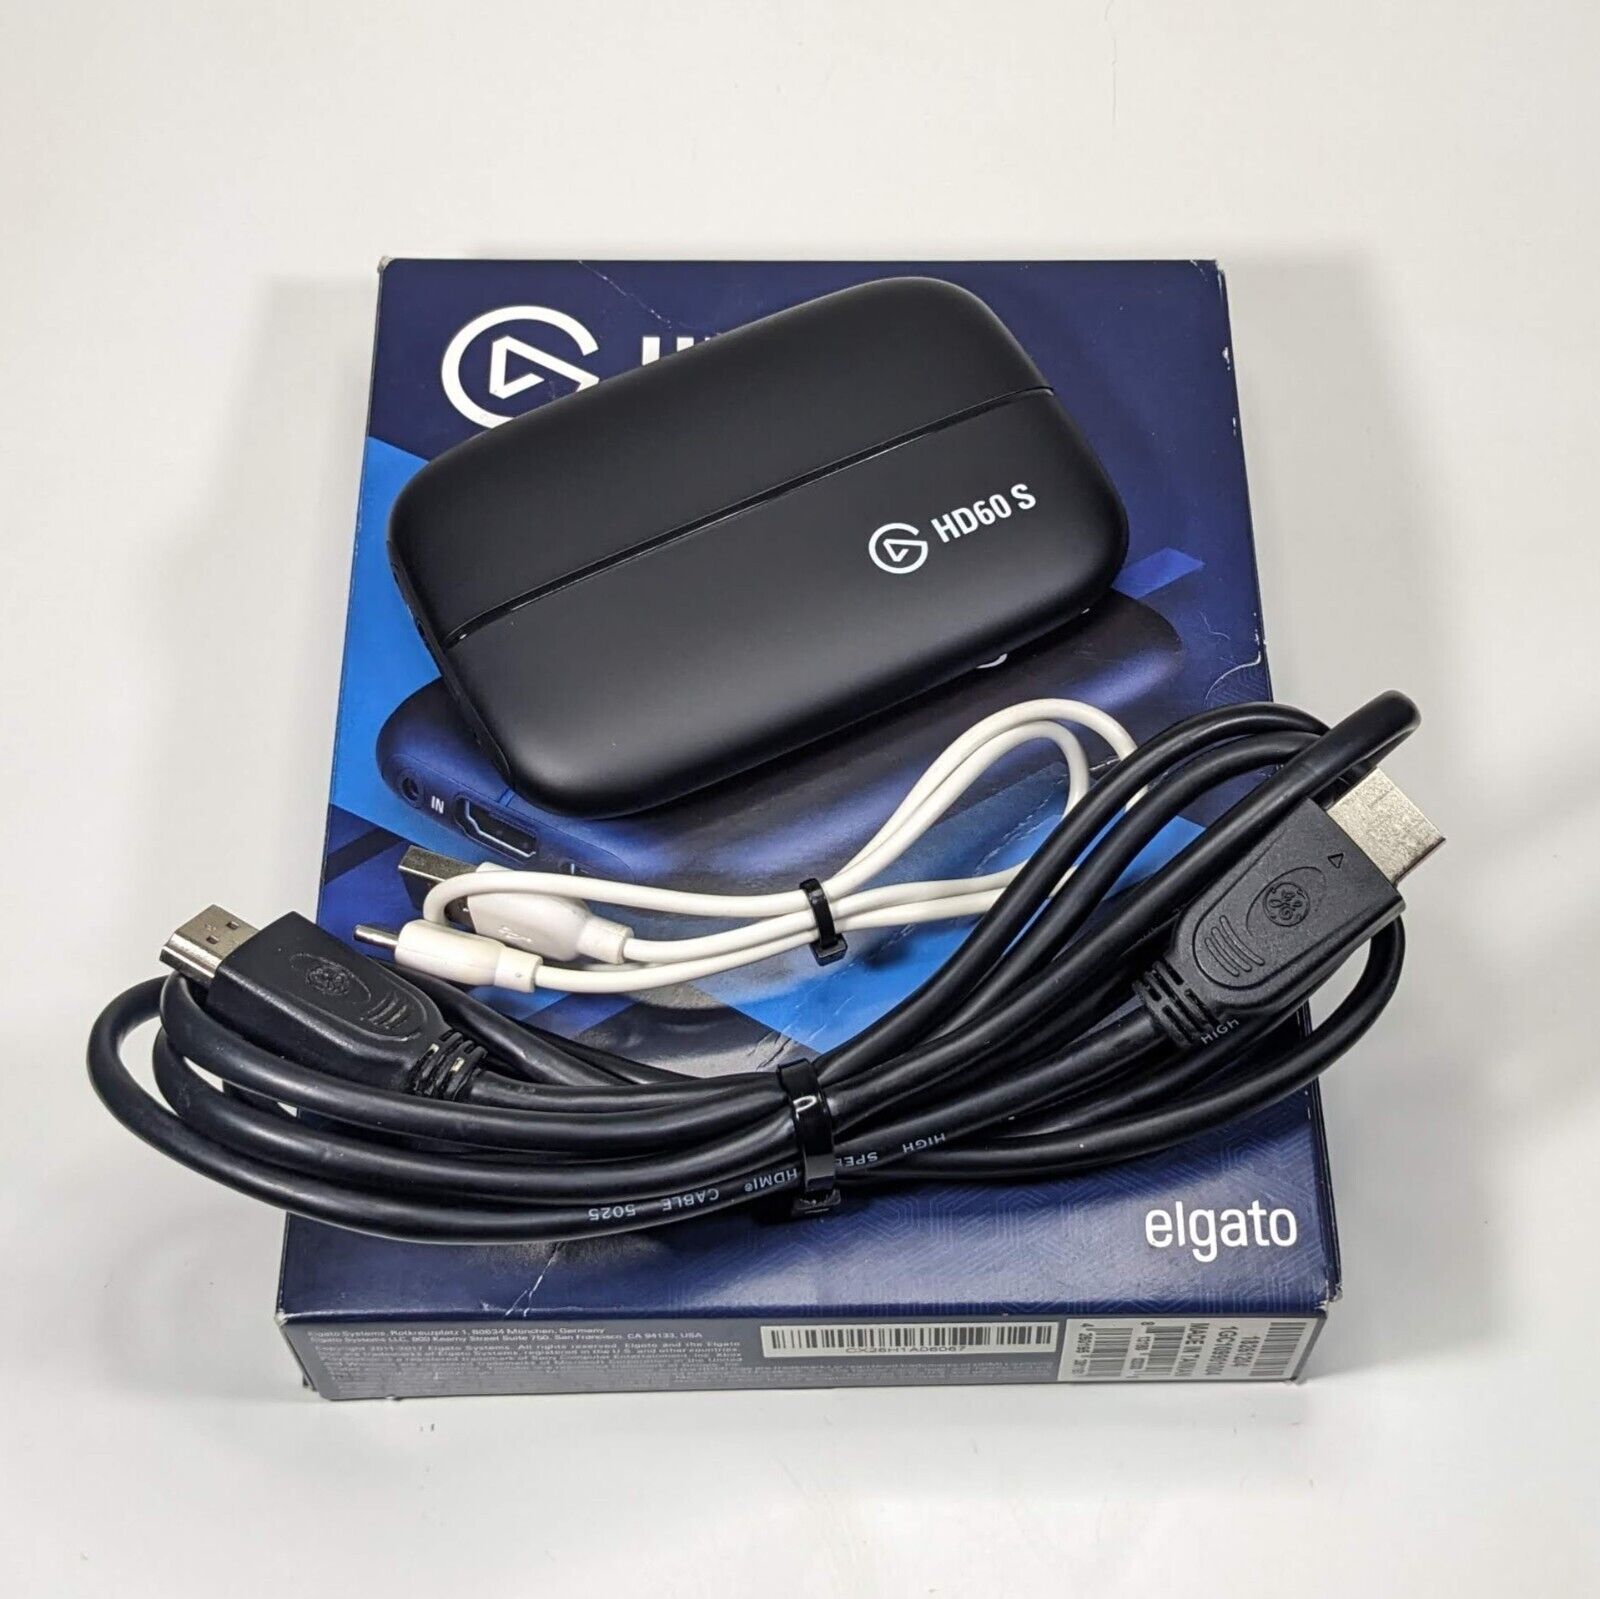 Elgato HD60 S Game Capture Card - Tested Good - w/ Cables & Box